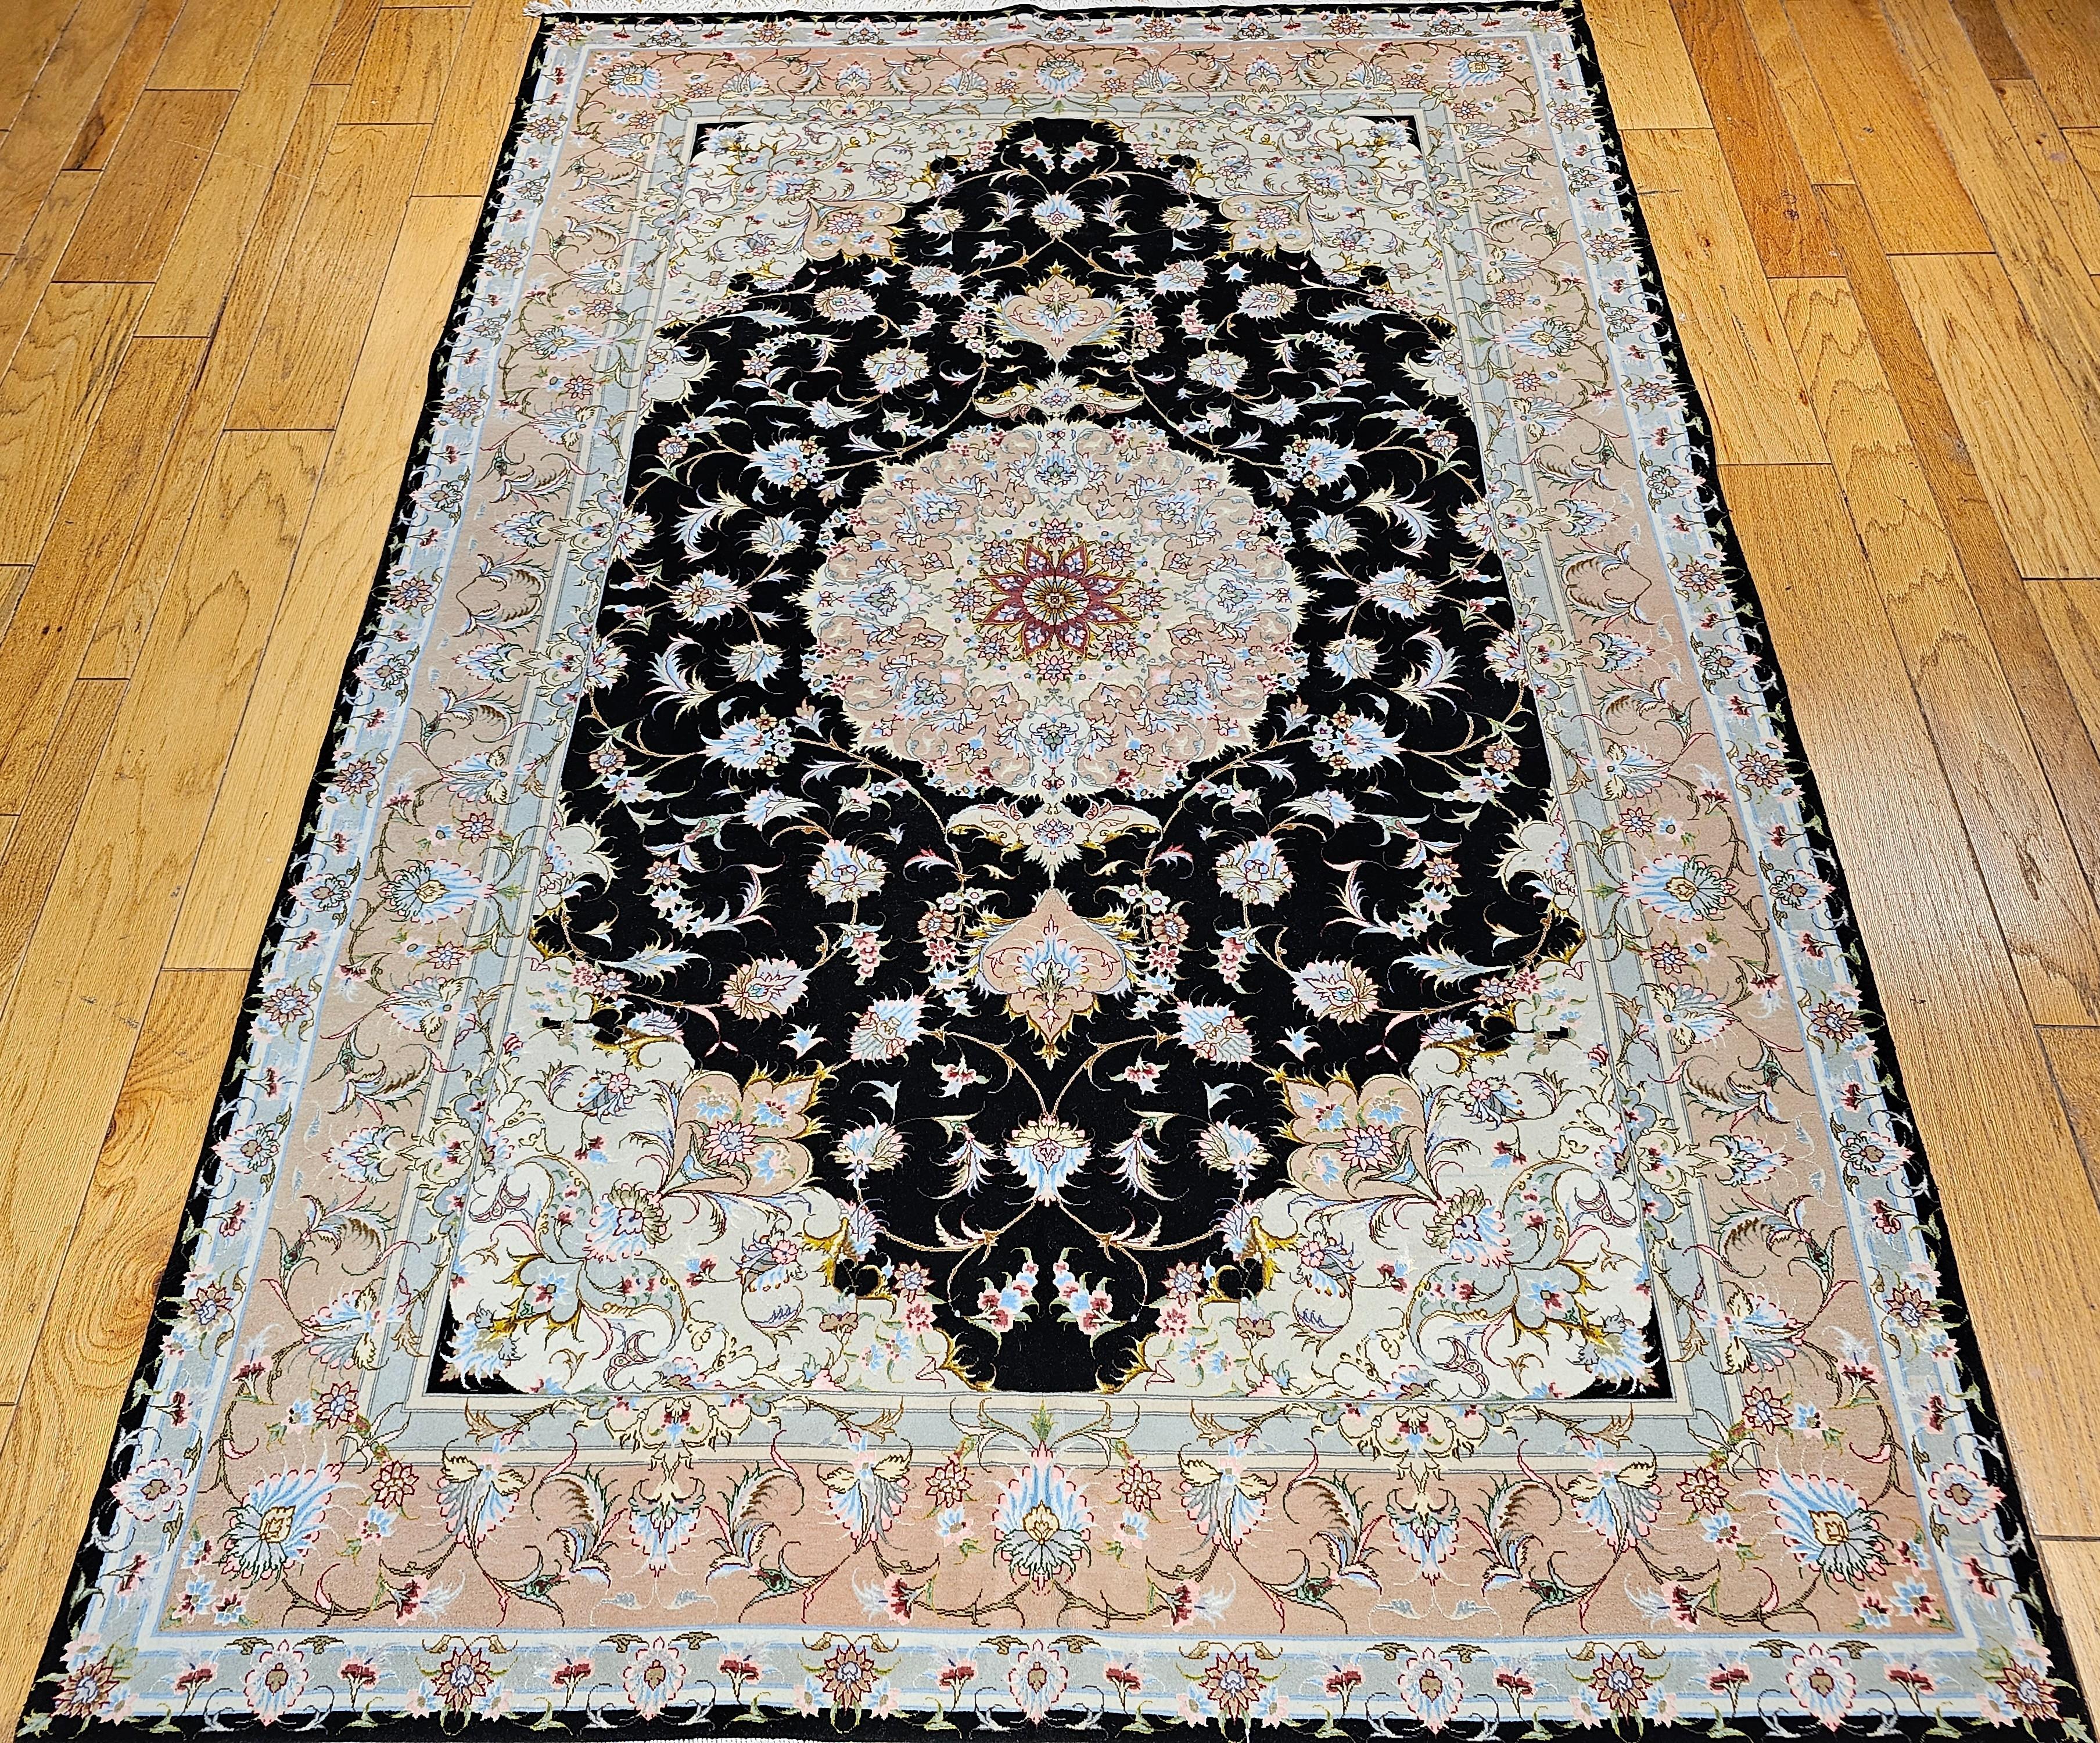 Rare and beautiful hand-knotted Persian Tabriz in a floral pattern in a black background with a brilliant color palette.   The rug has a wool pile on a cotton foundation with silk highlights.  It has a pale peach color border. The central medallion